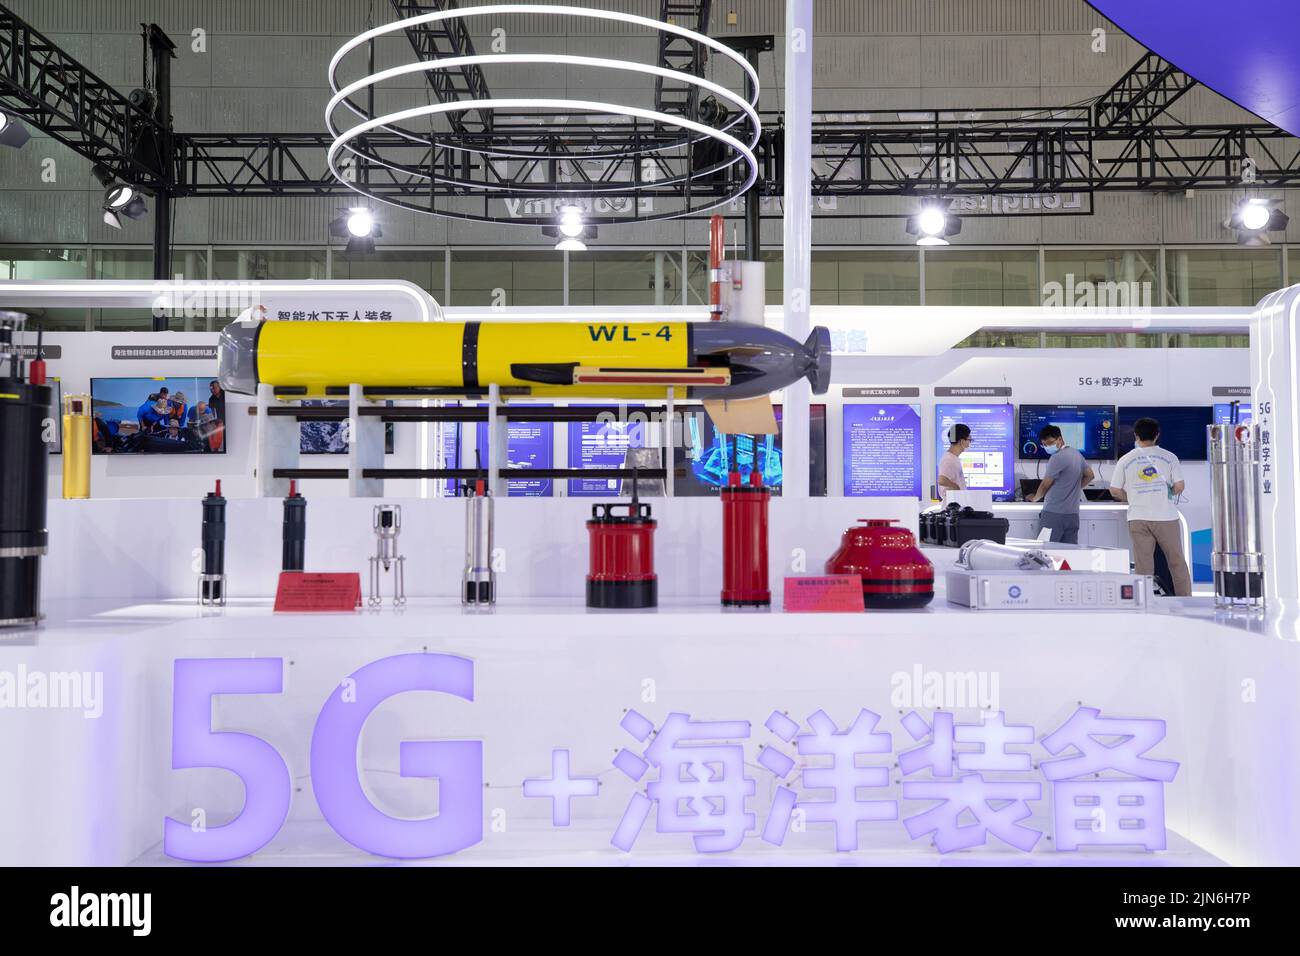 (220809) -- HARBIN, Aug. 9, 2022 (Xinhua) -- Photo taken on Aug. 9, 2022 shows an exhibition area for 5G+ marine equipment during a media preview of the 2022 World 5G Convention in Harbin, capital of northeast China's Heilongjiang Province. The 2022 World 5G Convention will be held here from August 10 to 12. (Xinhua/Zhang Tao) Stock Photo